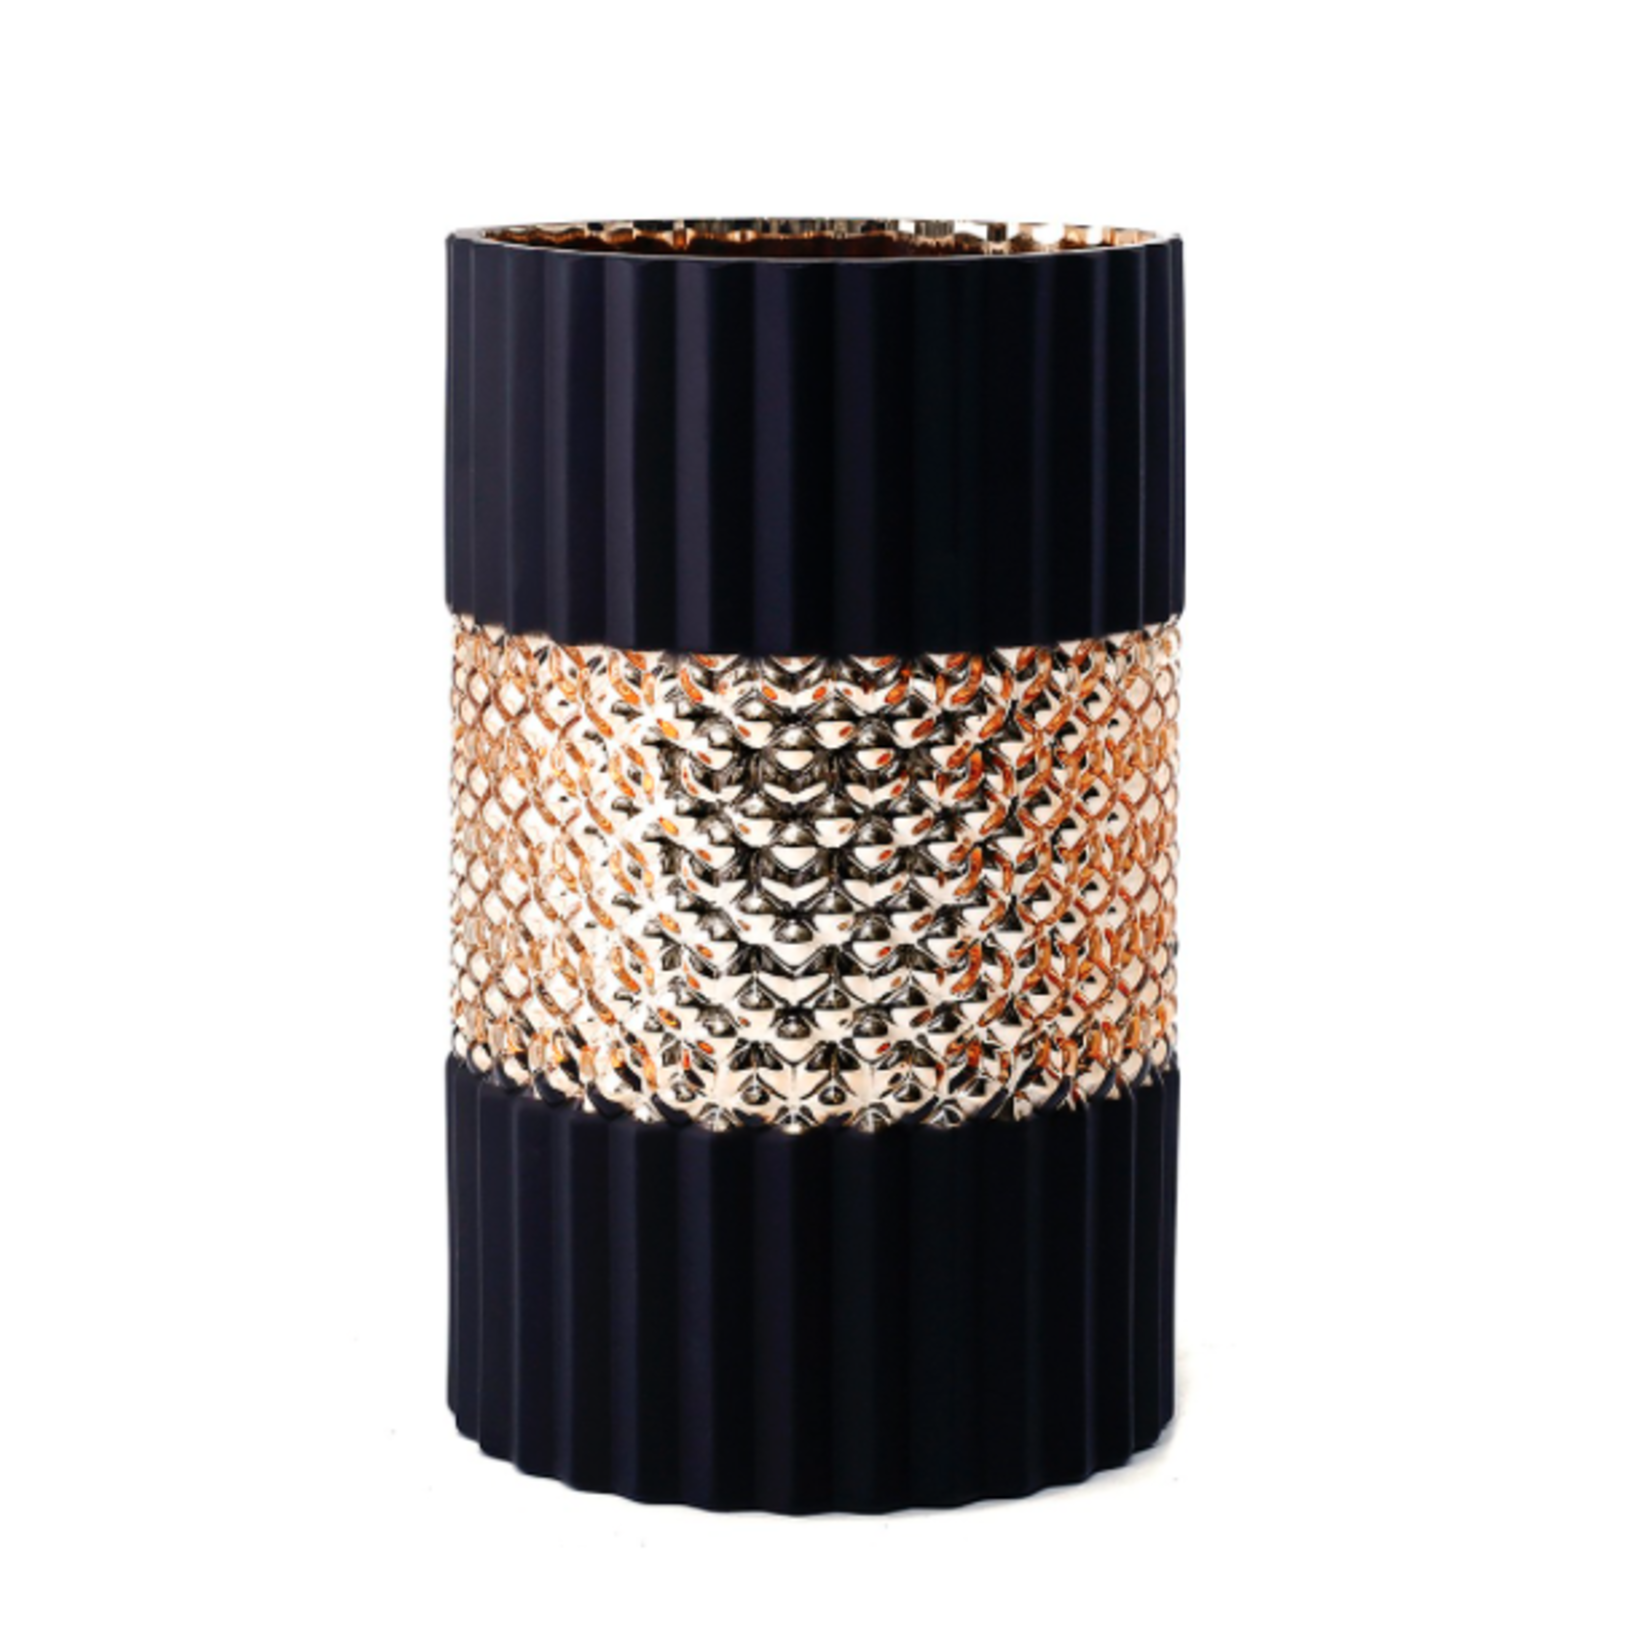 8”H X 4.5” BLACK WITH GOLD STUDDED AND RIBBED GLASS VASE